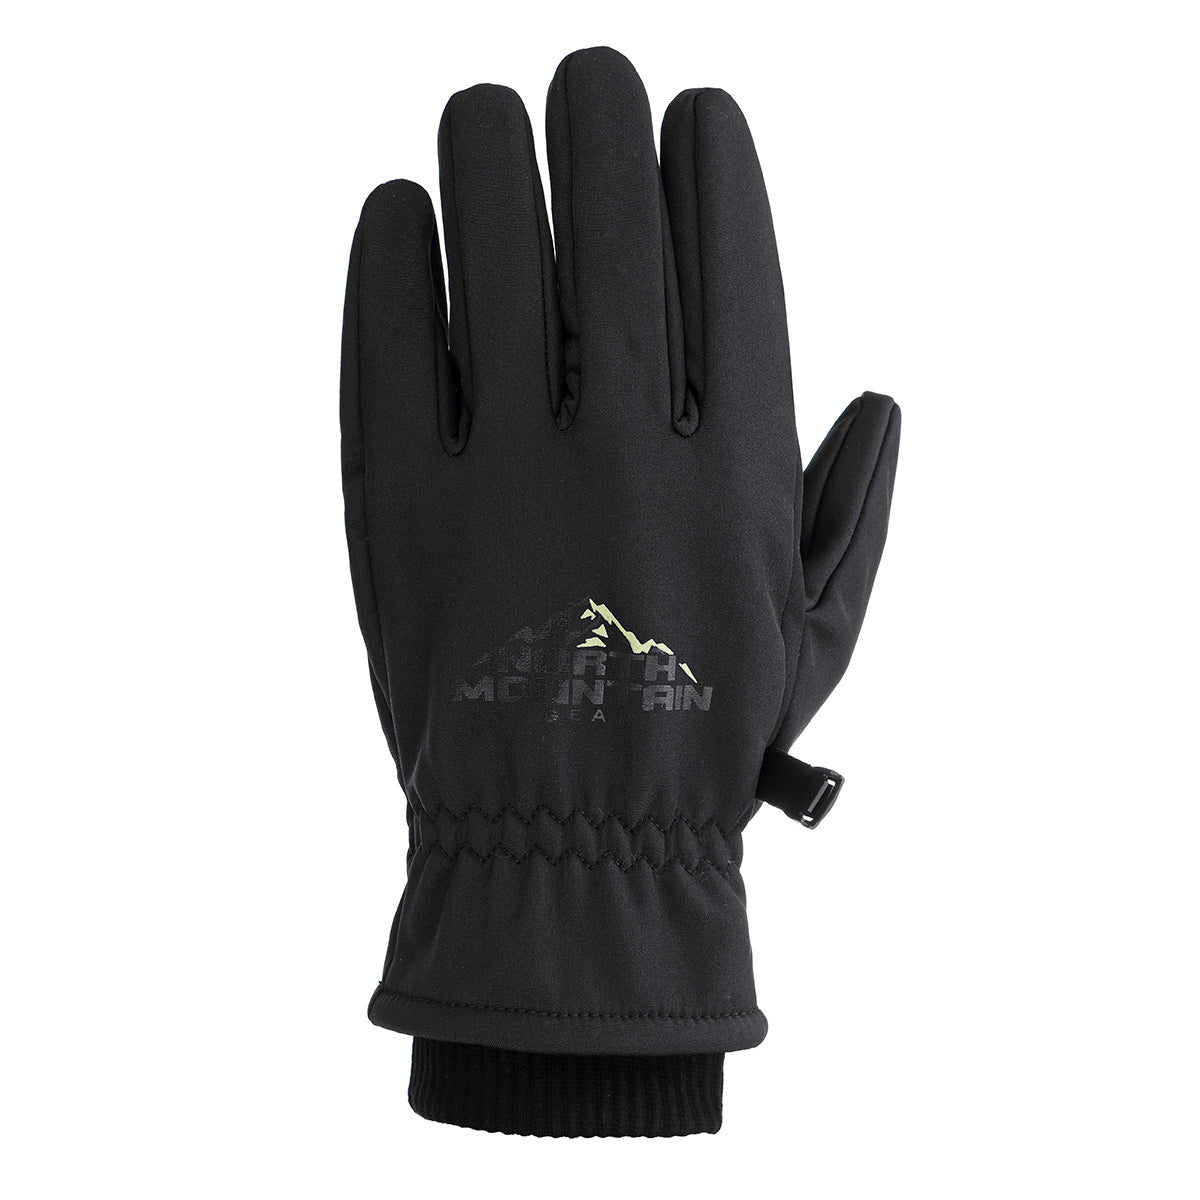 Dark Slate Gray Winter Warm Touch Screen Thermal Gloves Motorcycle Ski Snow Snowboard Cycling Touchscreen Waterproof